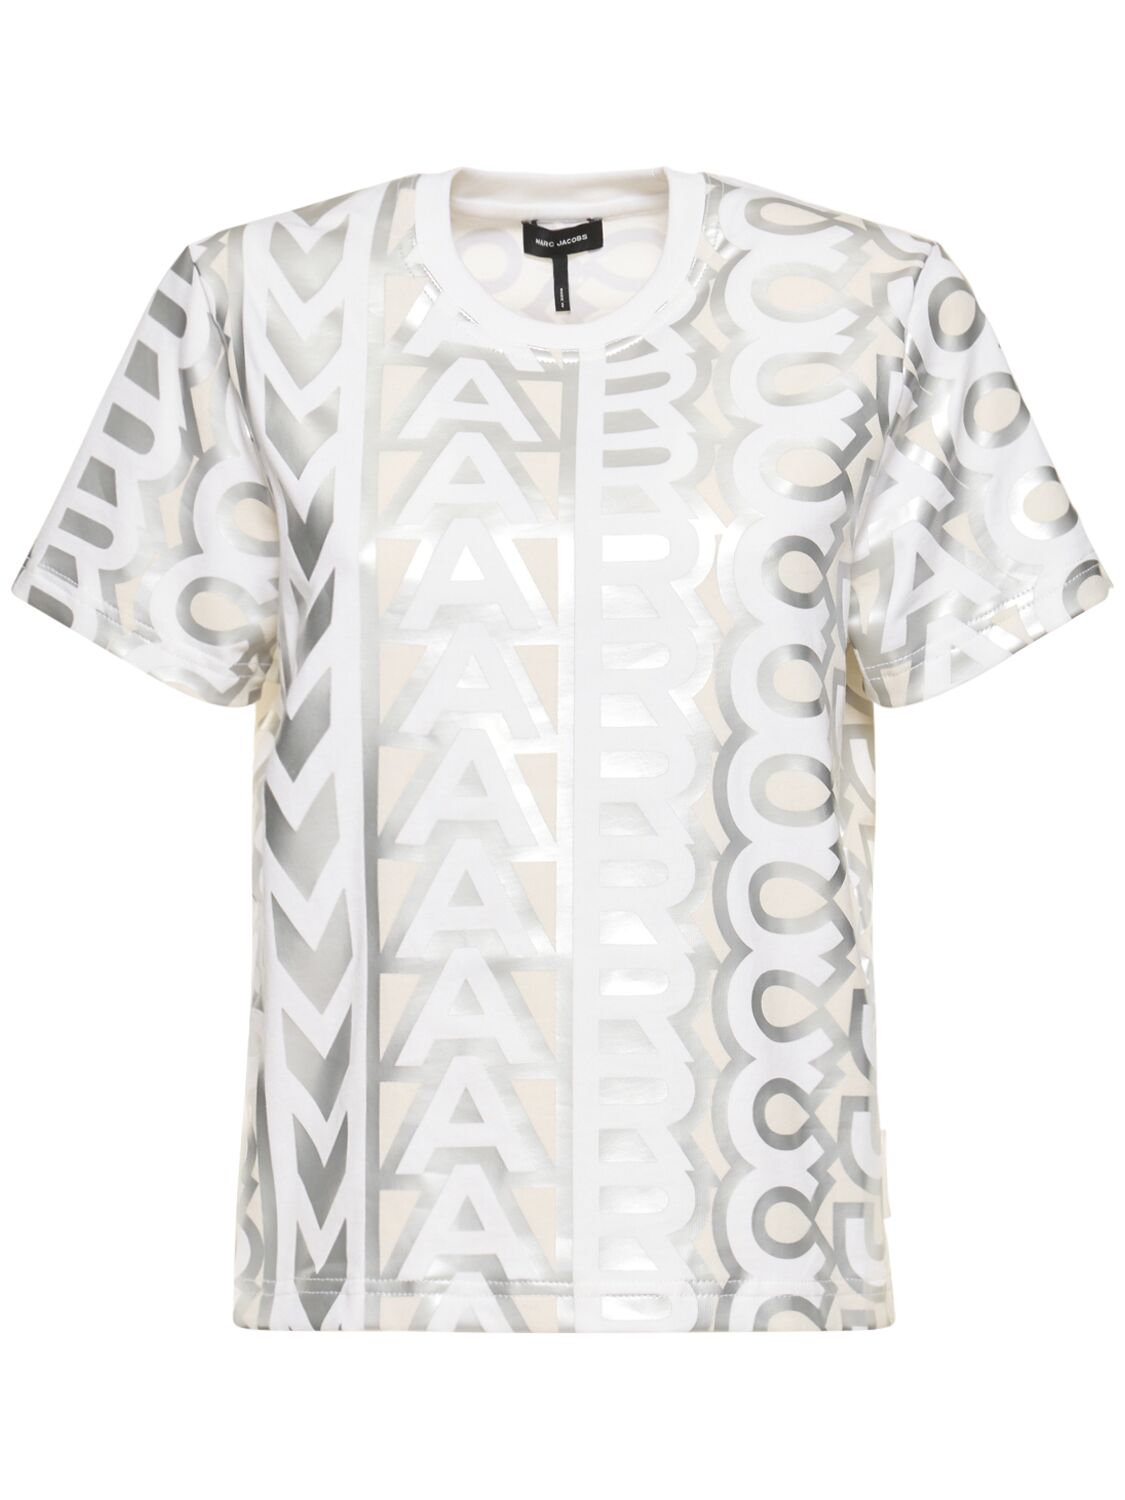 MARC JACOBS THE MONOGRAM BABY T-SHIRT